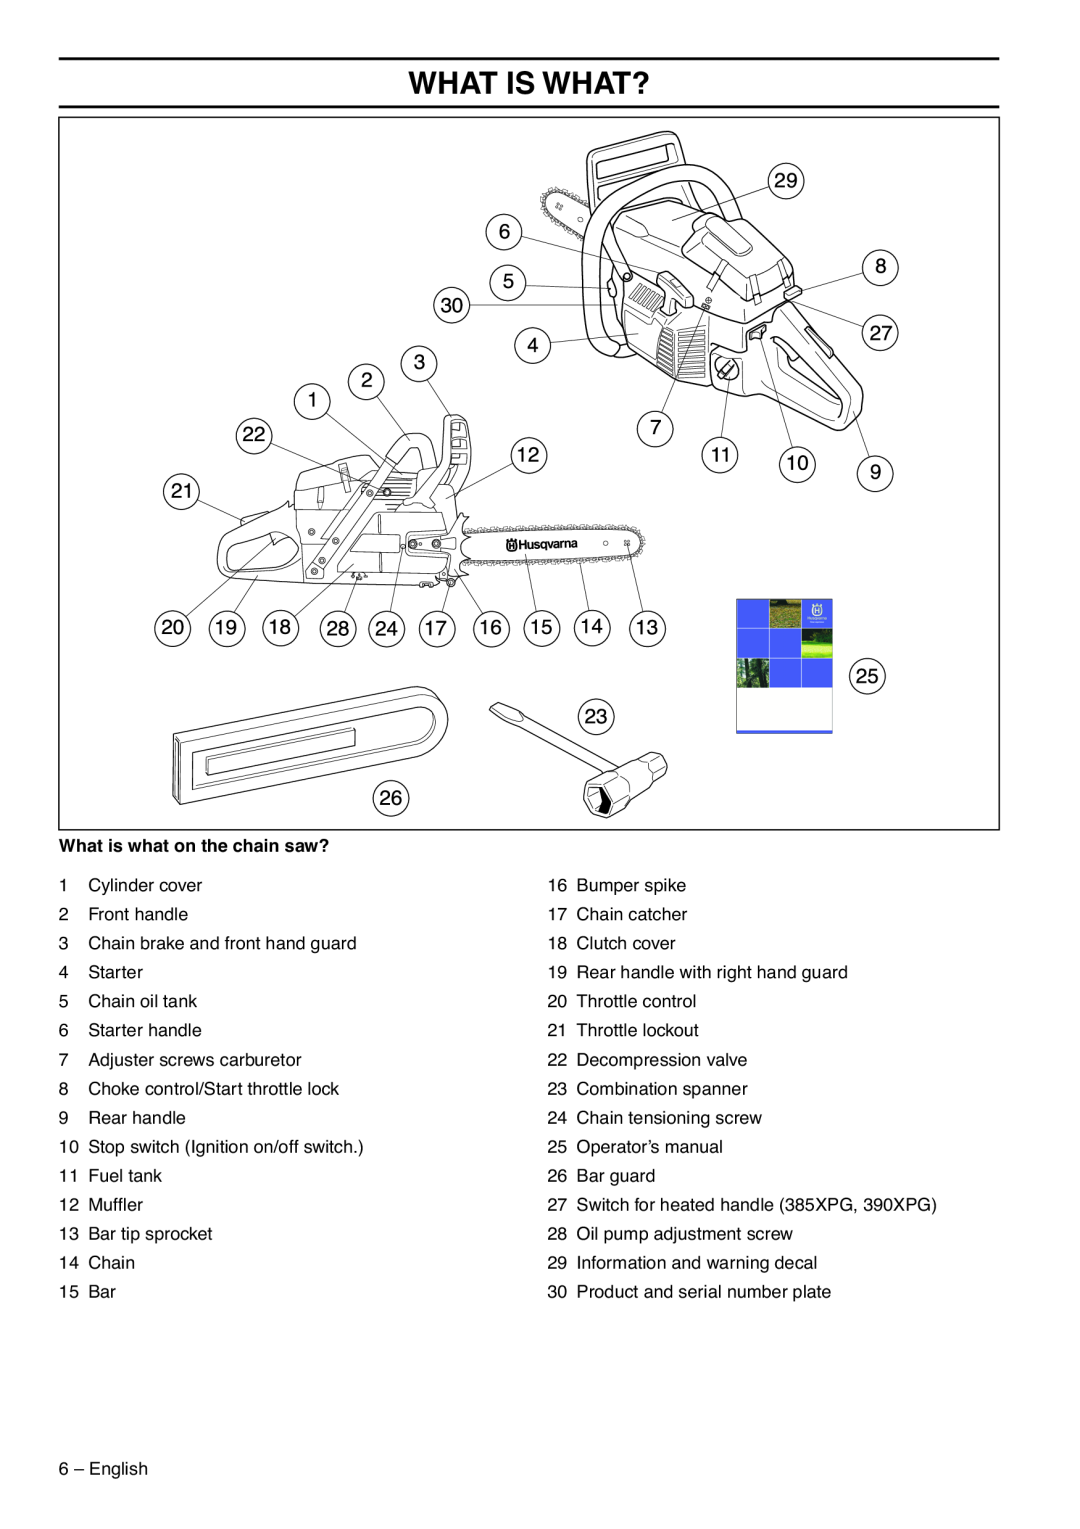 Husqvarna 385XPG, 390XPG, 1153176-95 manual What Is What?, What is what on the chain saw? 